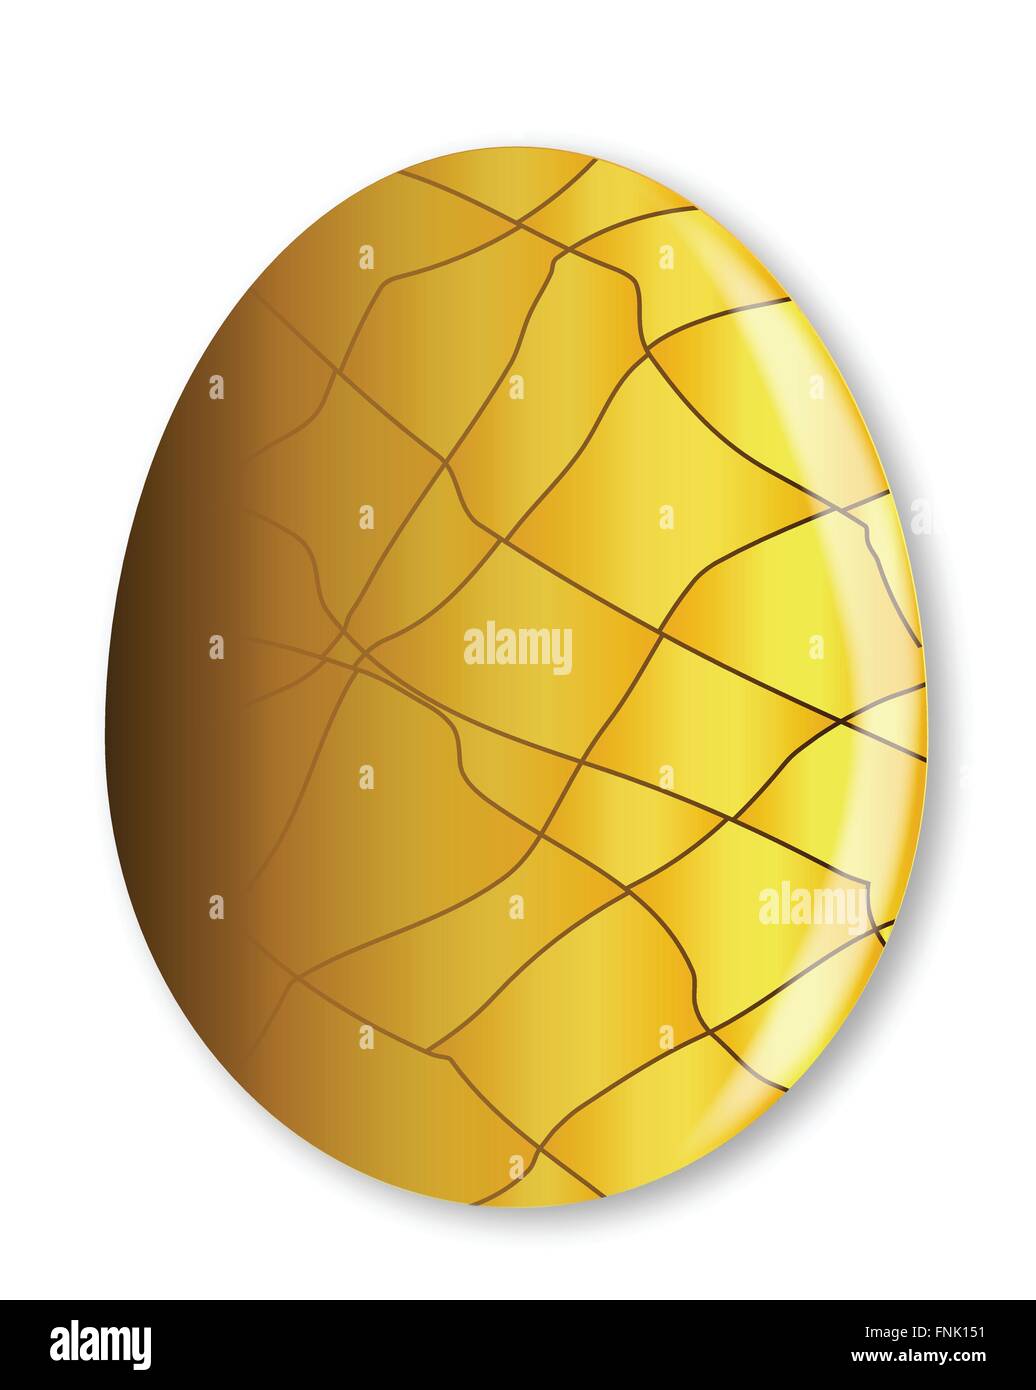 Cracked Stock Vector Images - Alamy